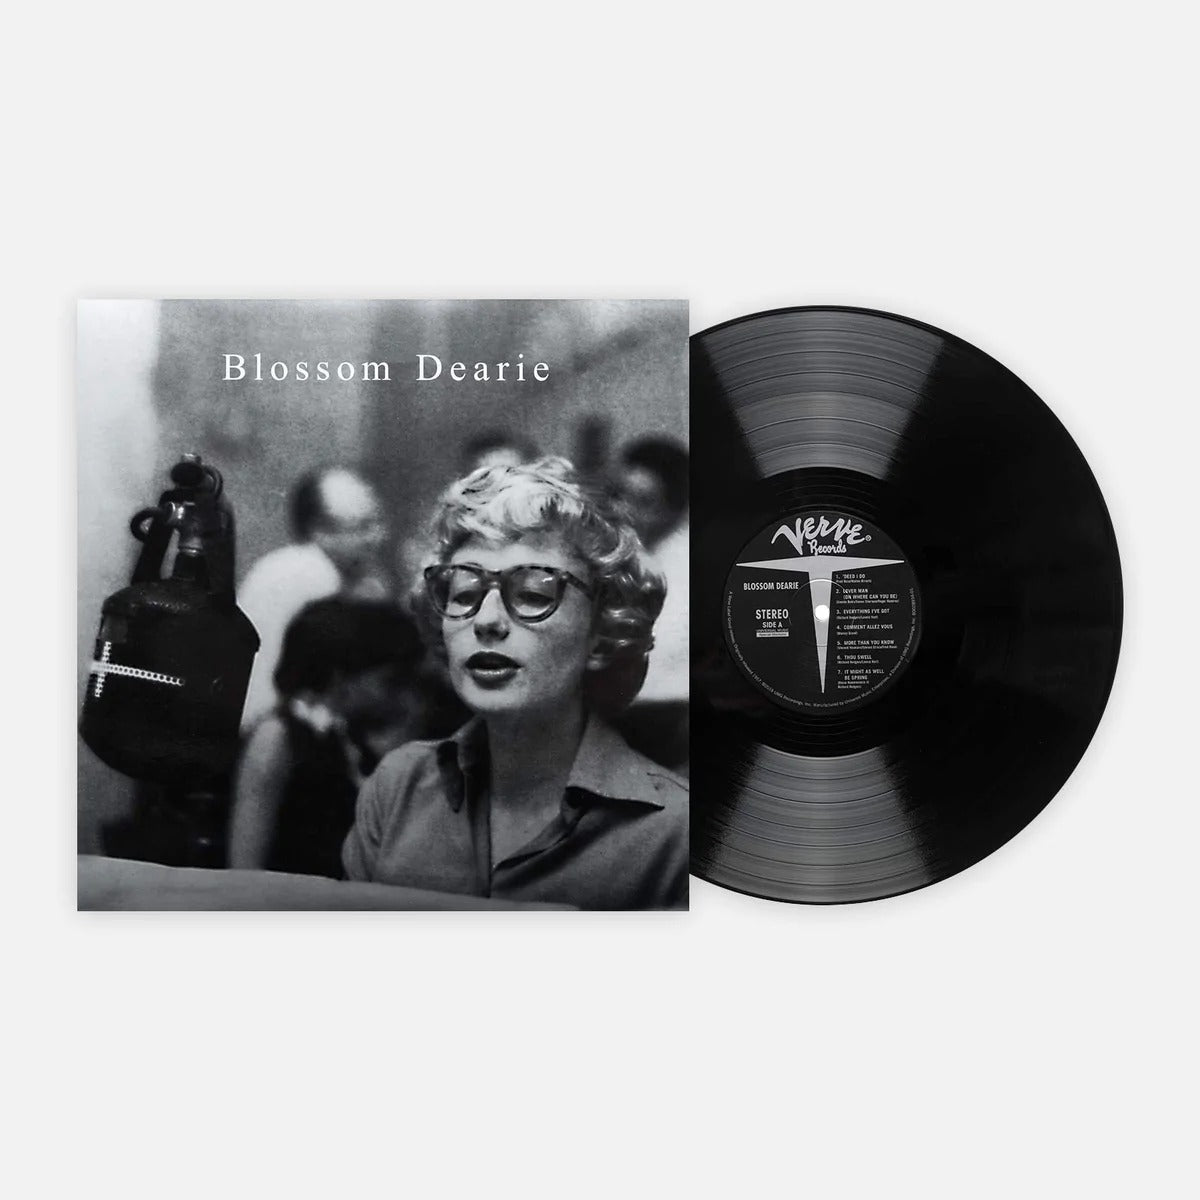 Blossom Dearie - S/T LP (Vinyl Me Please Edition, 180g, Remastered by Kevin Gray)